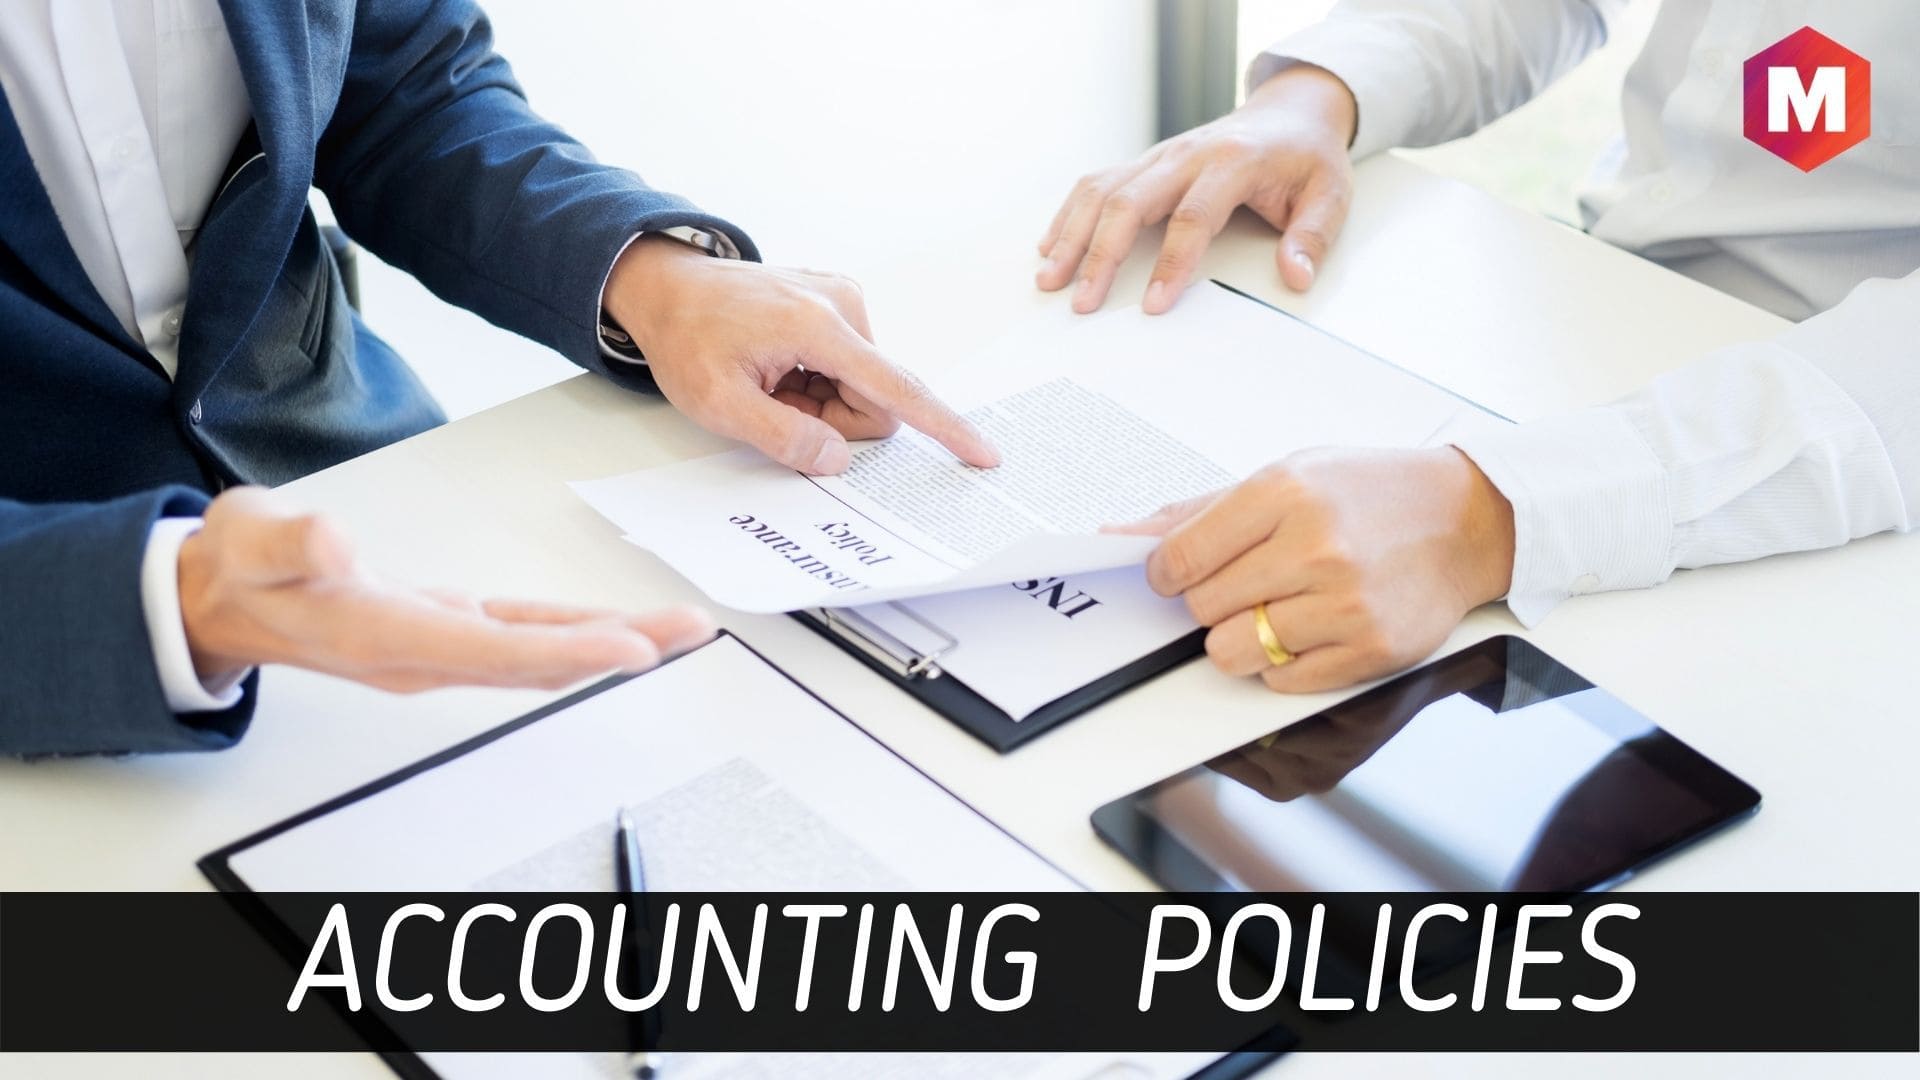 Accounting Policies – Definition, Importance and Examples